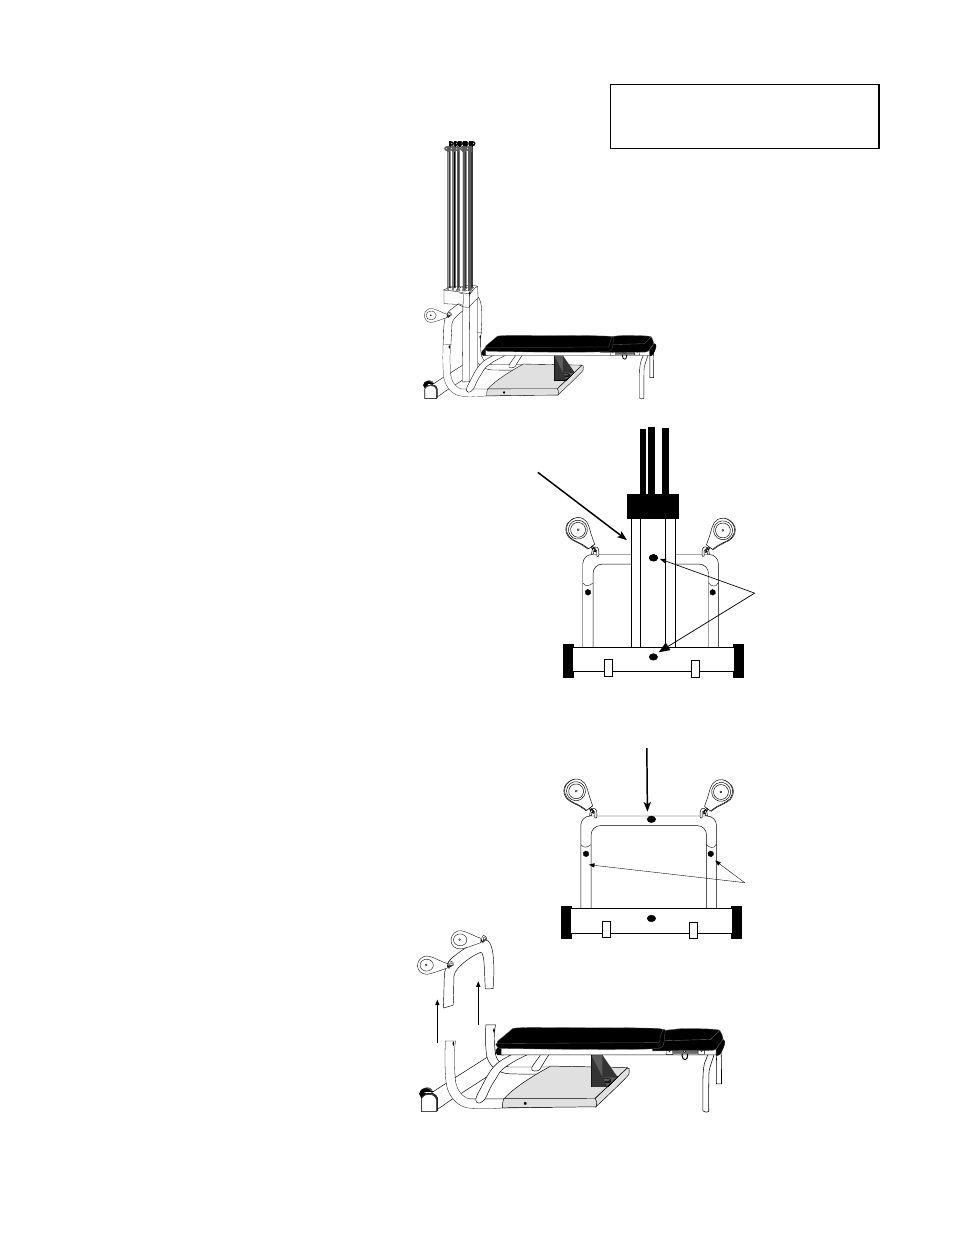 Chest bar assembly instructions step 2, Step 1, Step 4 | Step 3 | Bowflex XTL User Manual | Page 14 / 27